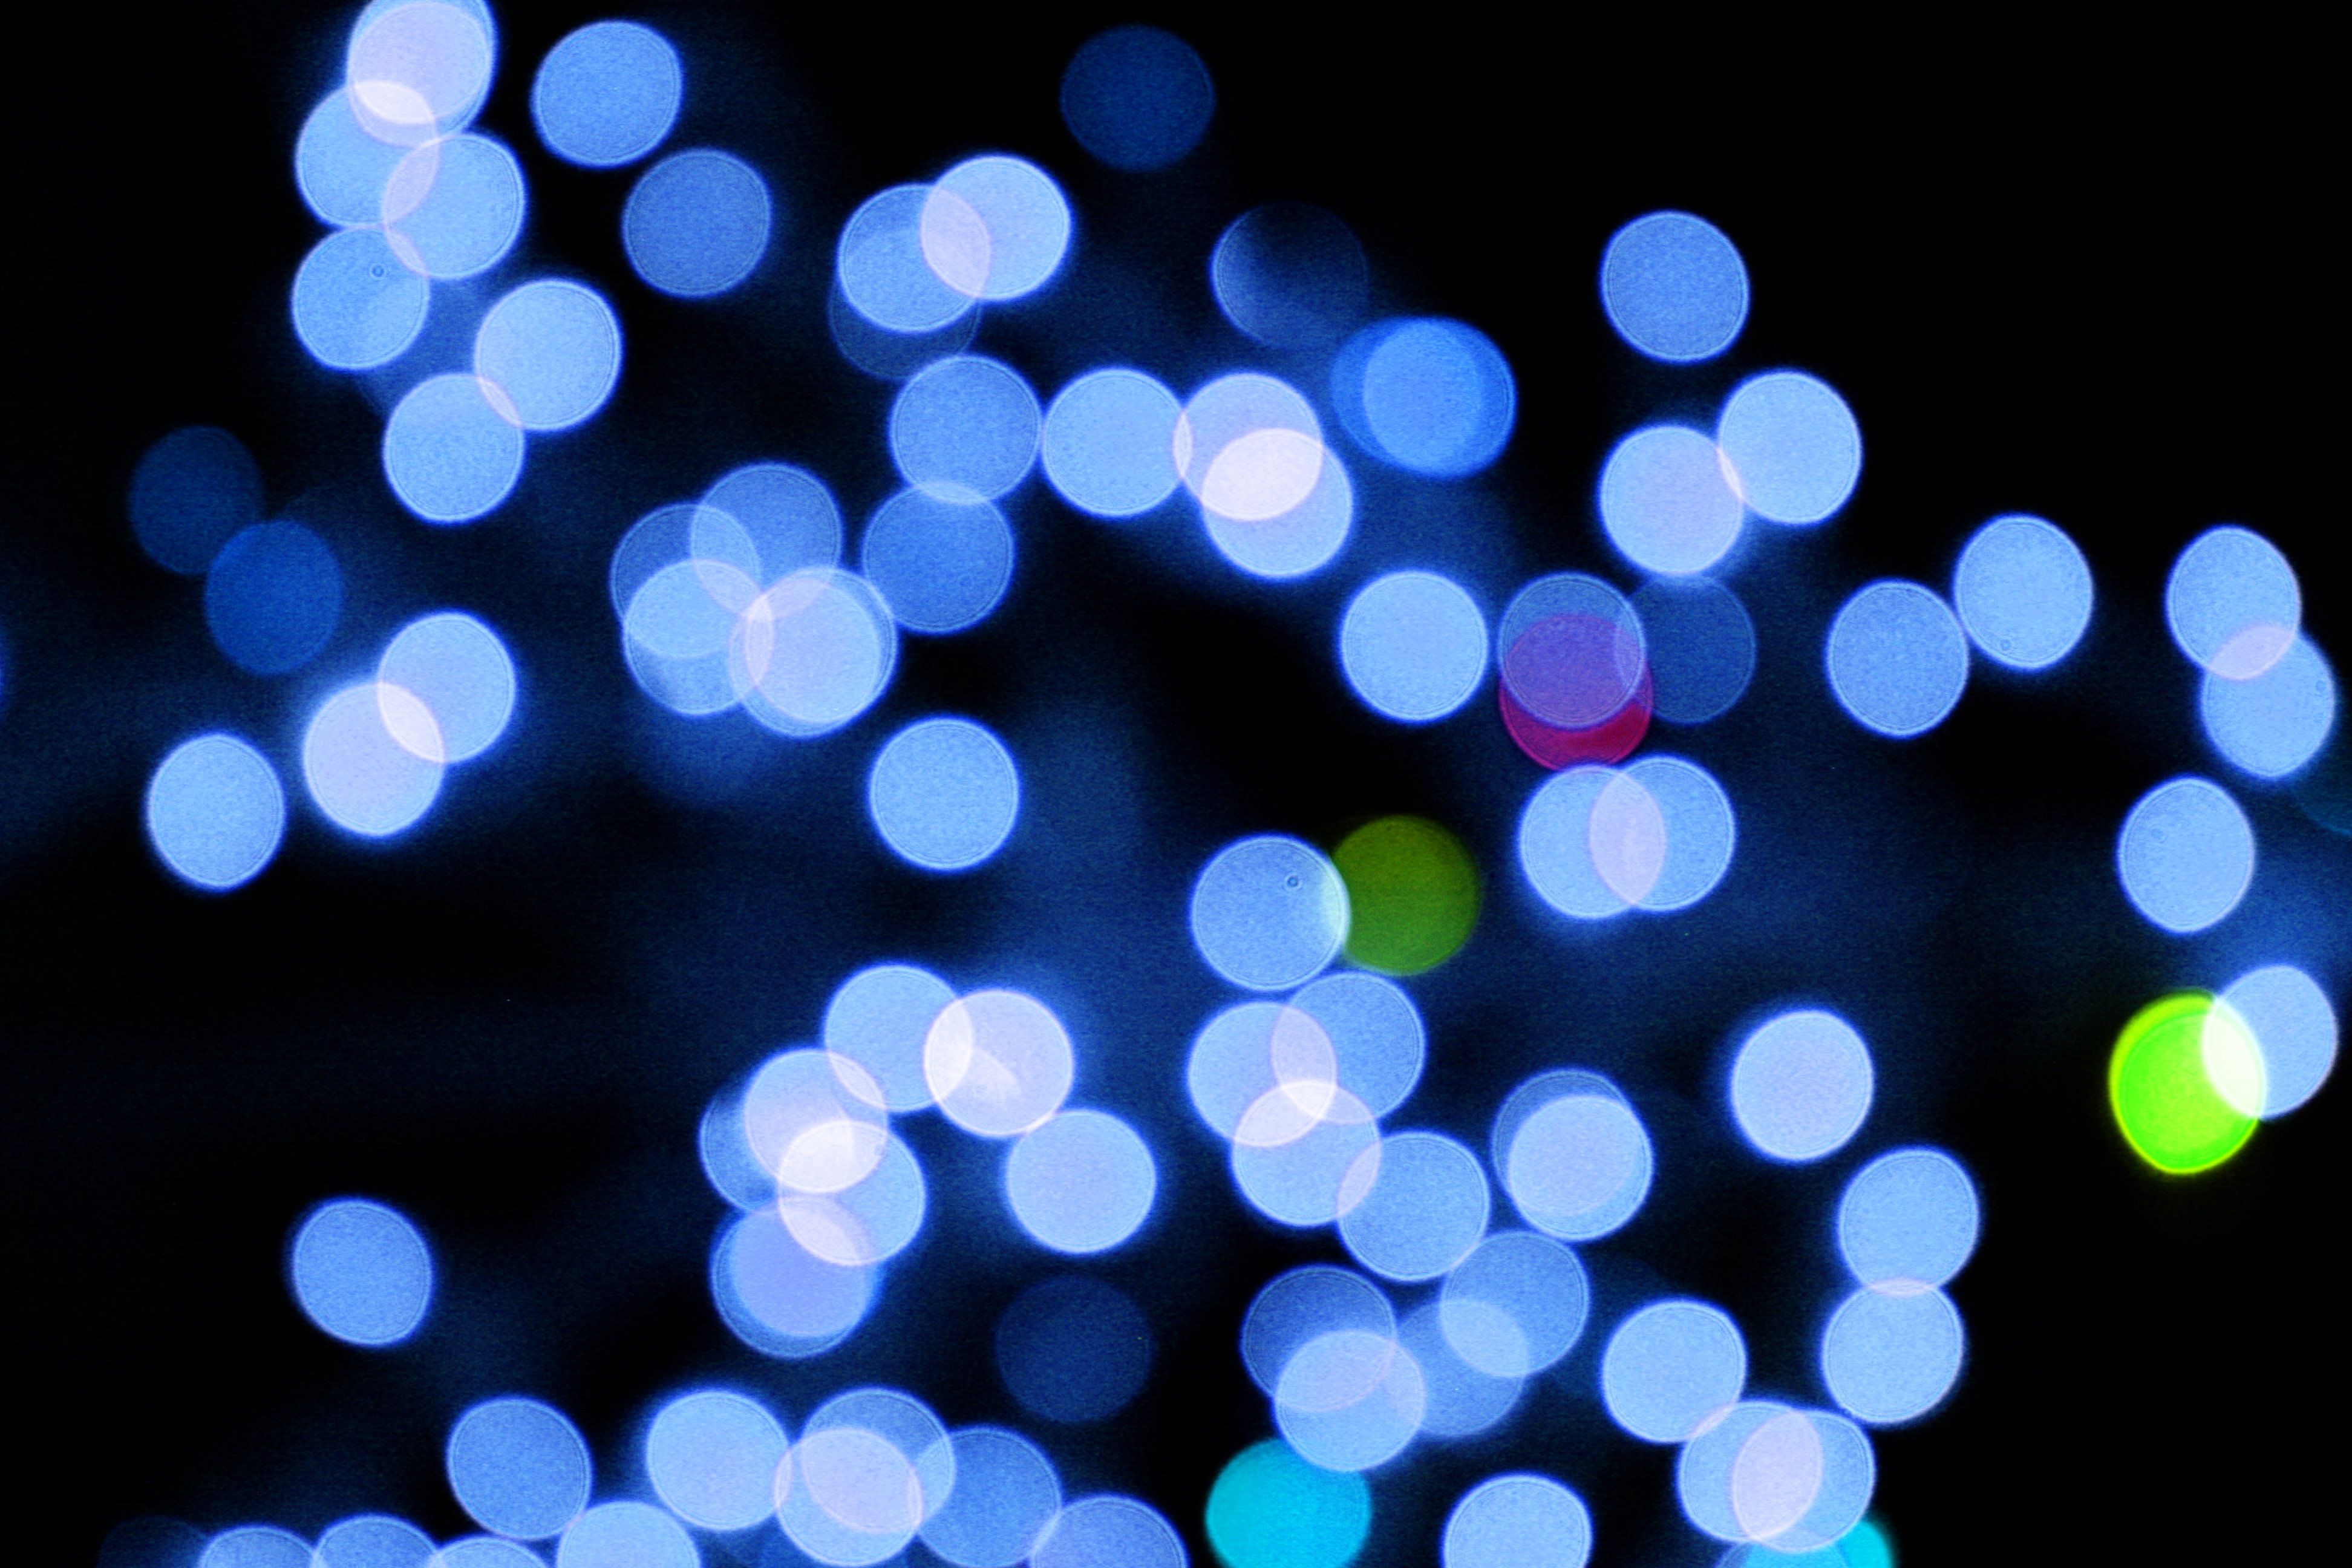 Blurred Christmas Lights Blue Picture. Free Photograph. Photo Public Domain